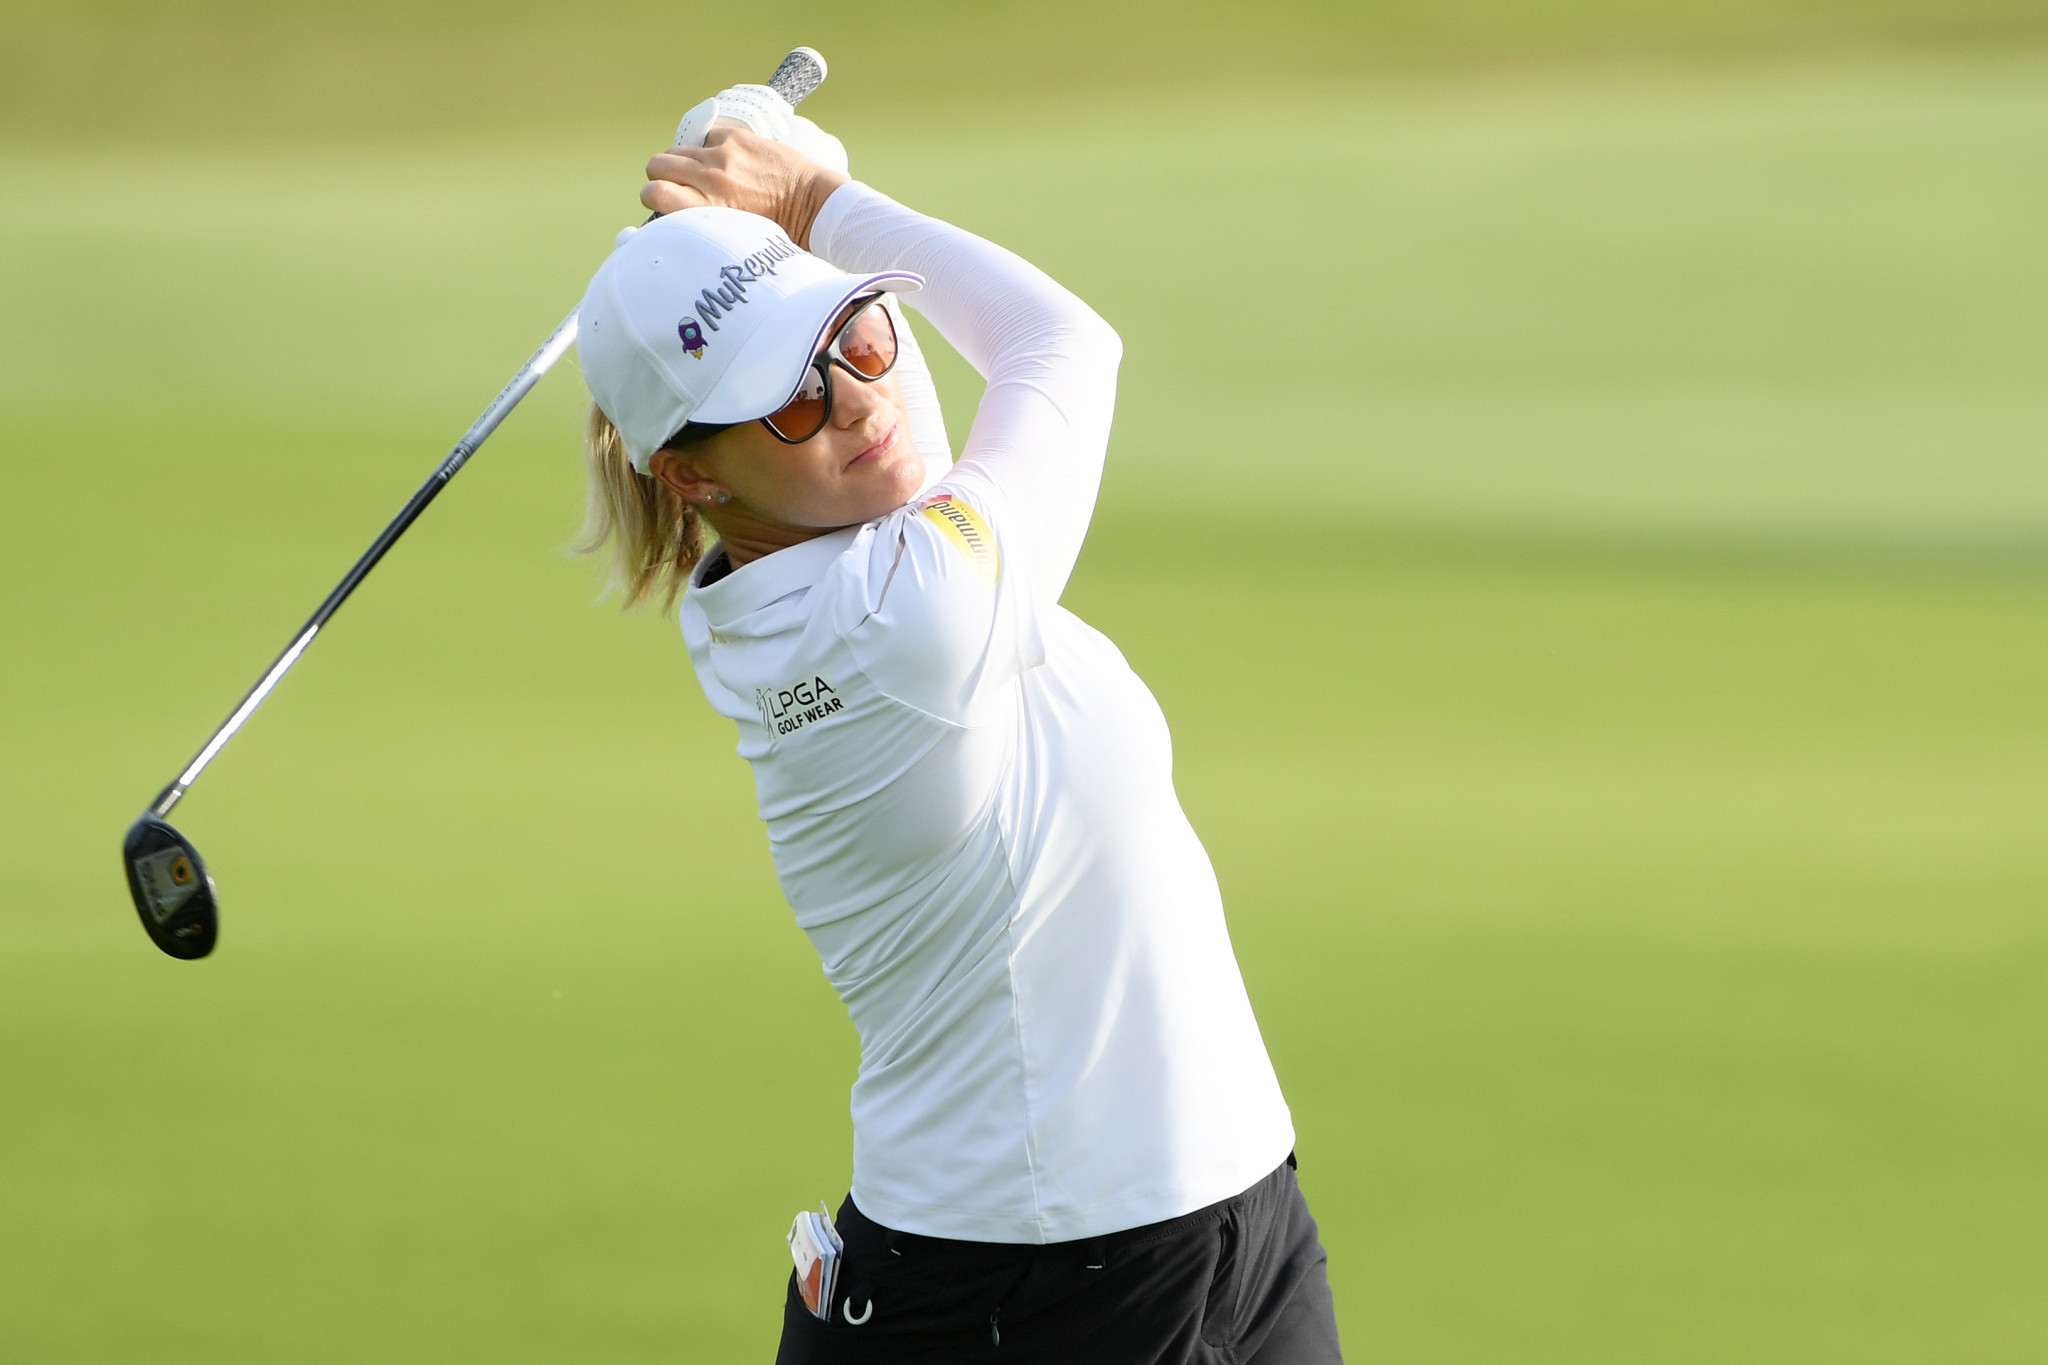 Smith leads after storm affects second round at US Women's Open